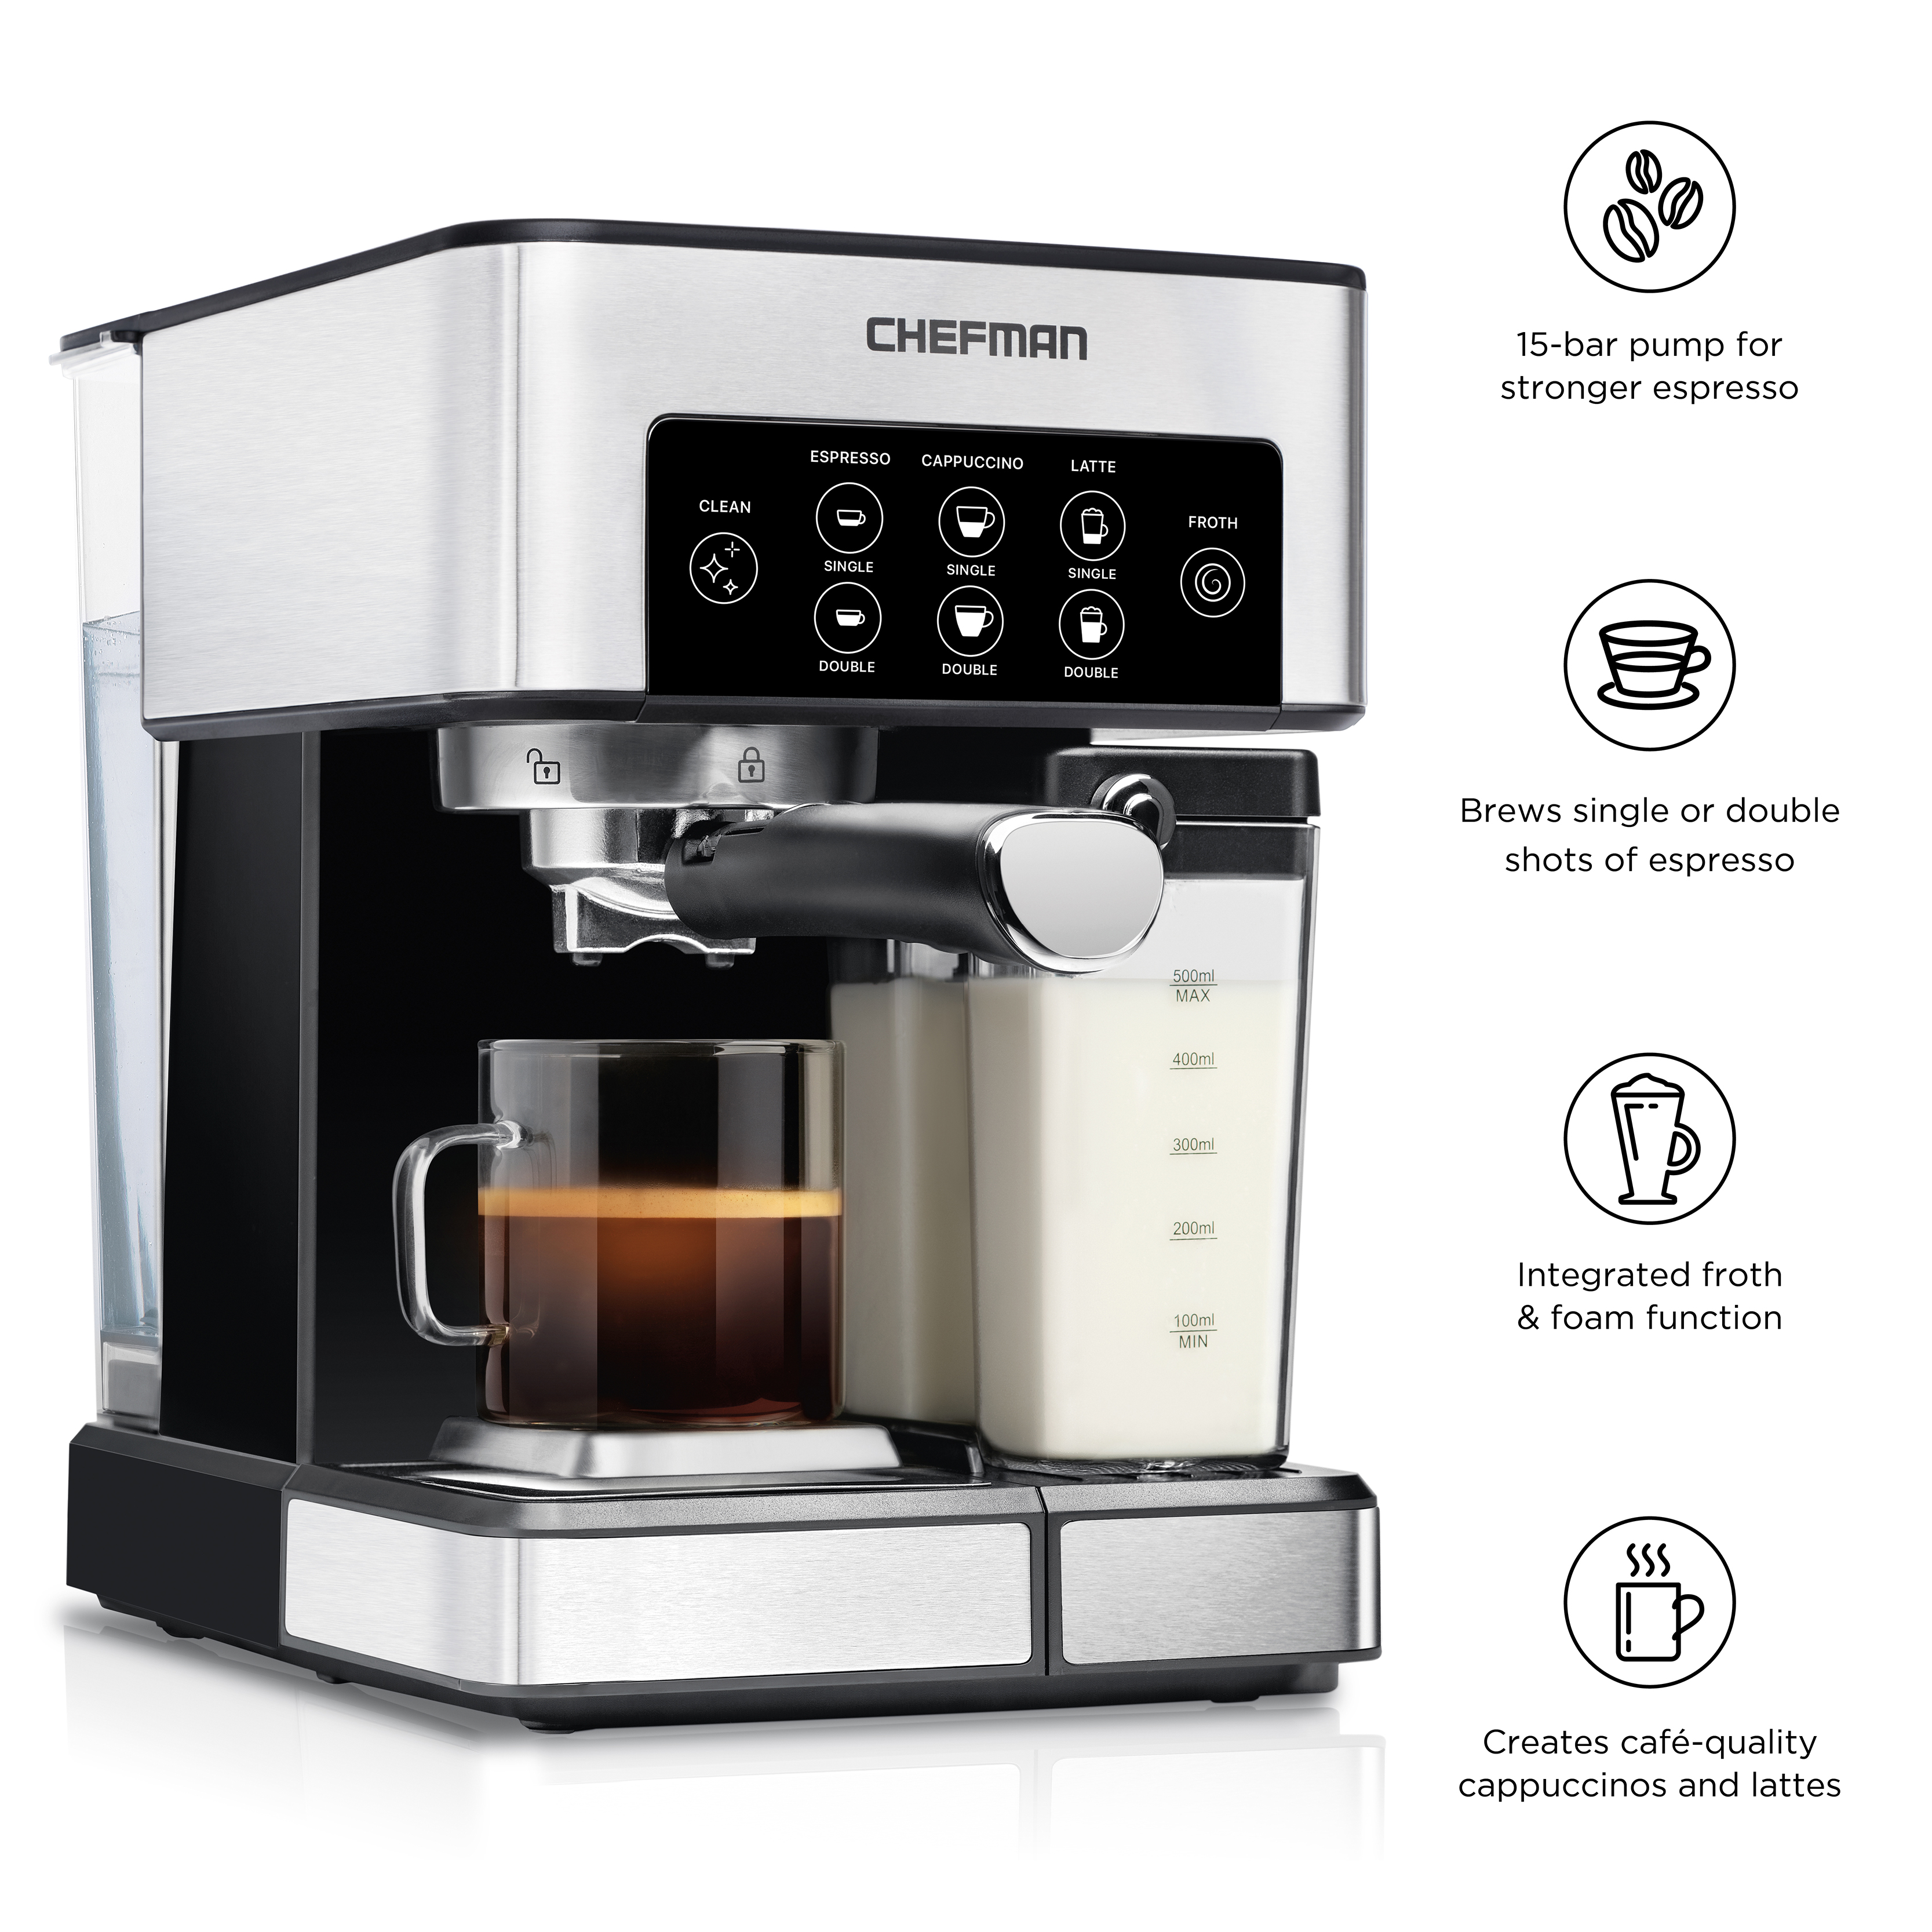 Chefman Barista Pro 6-in-1 Espresso Machine with Milk Frother, 15-BAR Pump, 1.8L Water Reservoir, Stainless Steel - image 2 of 8